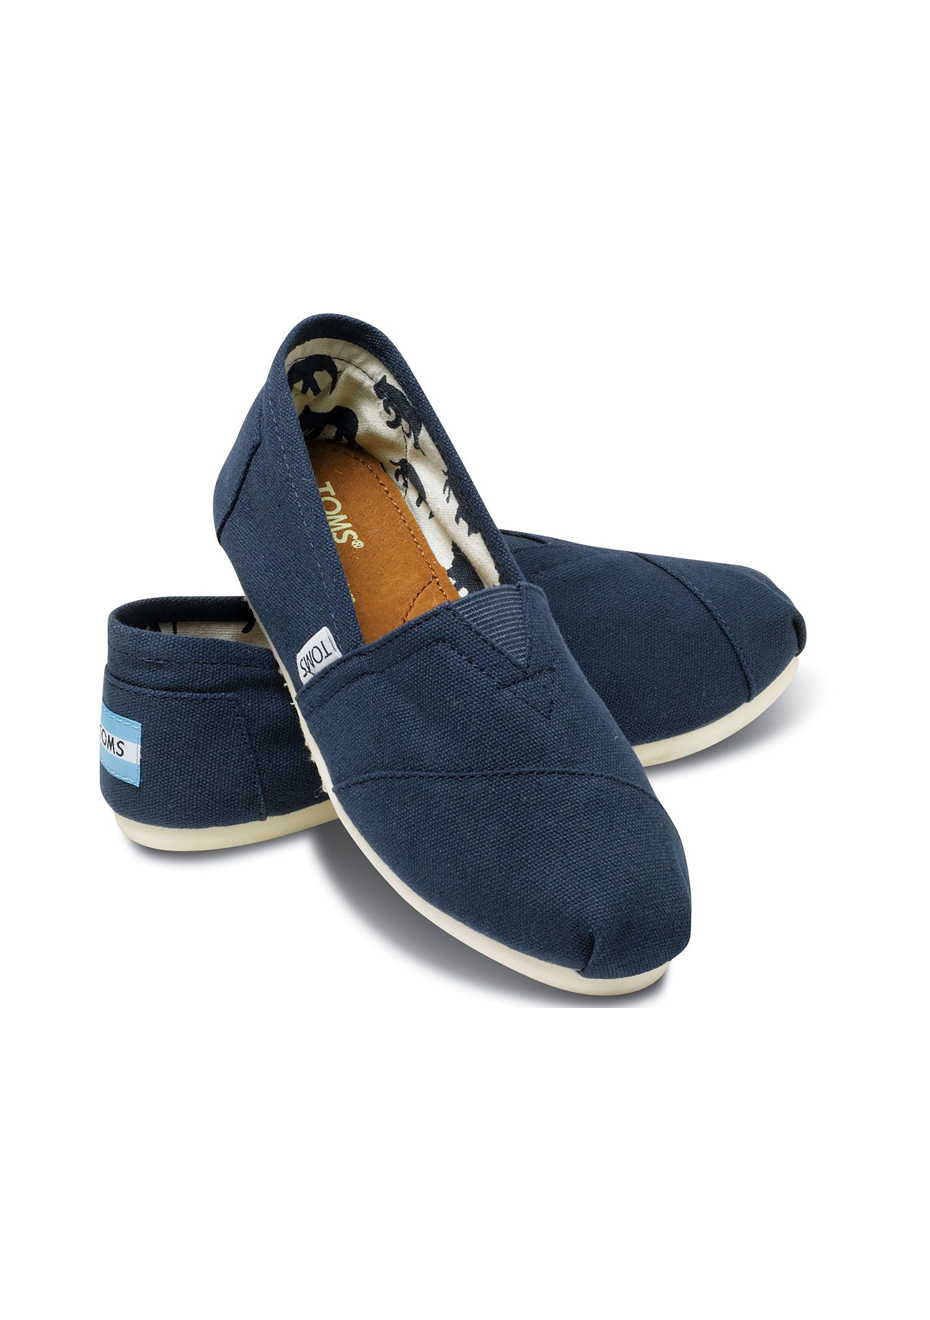 toms shoes navy